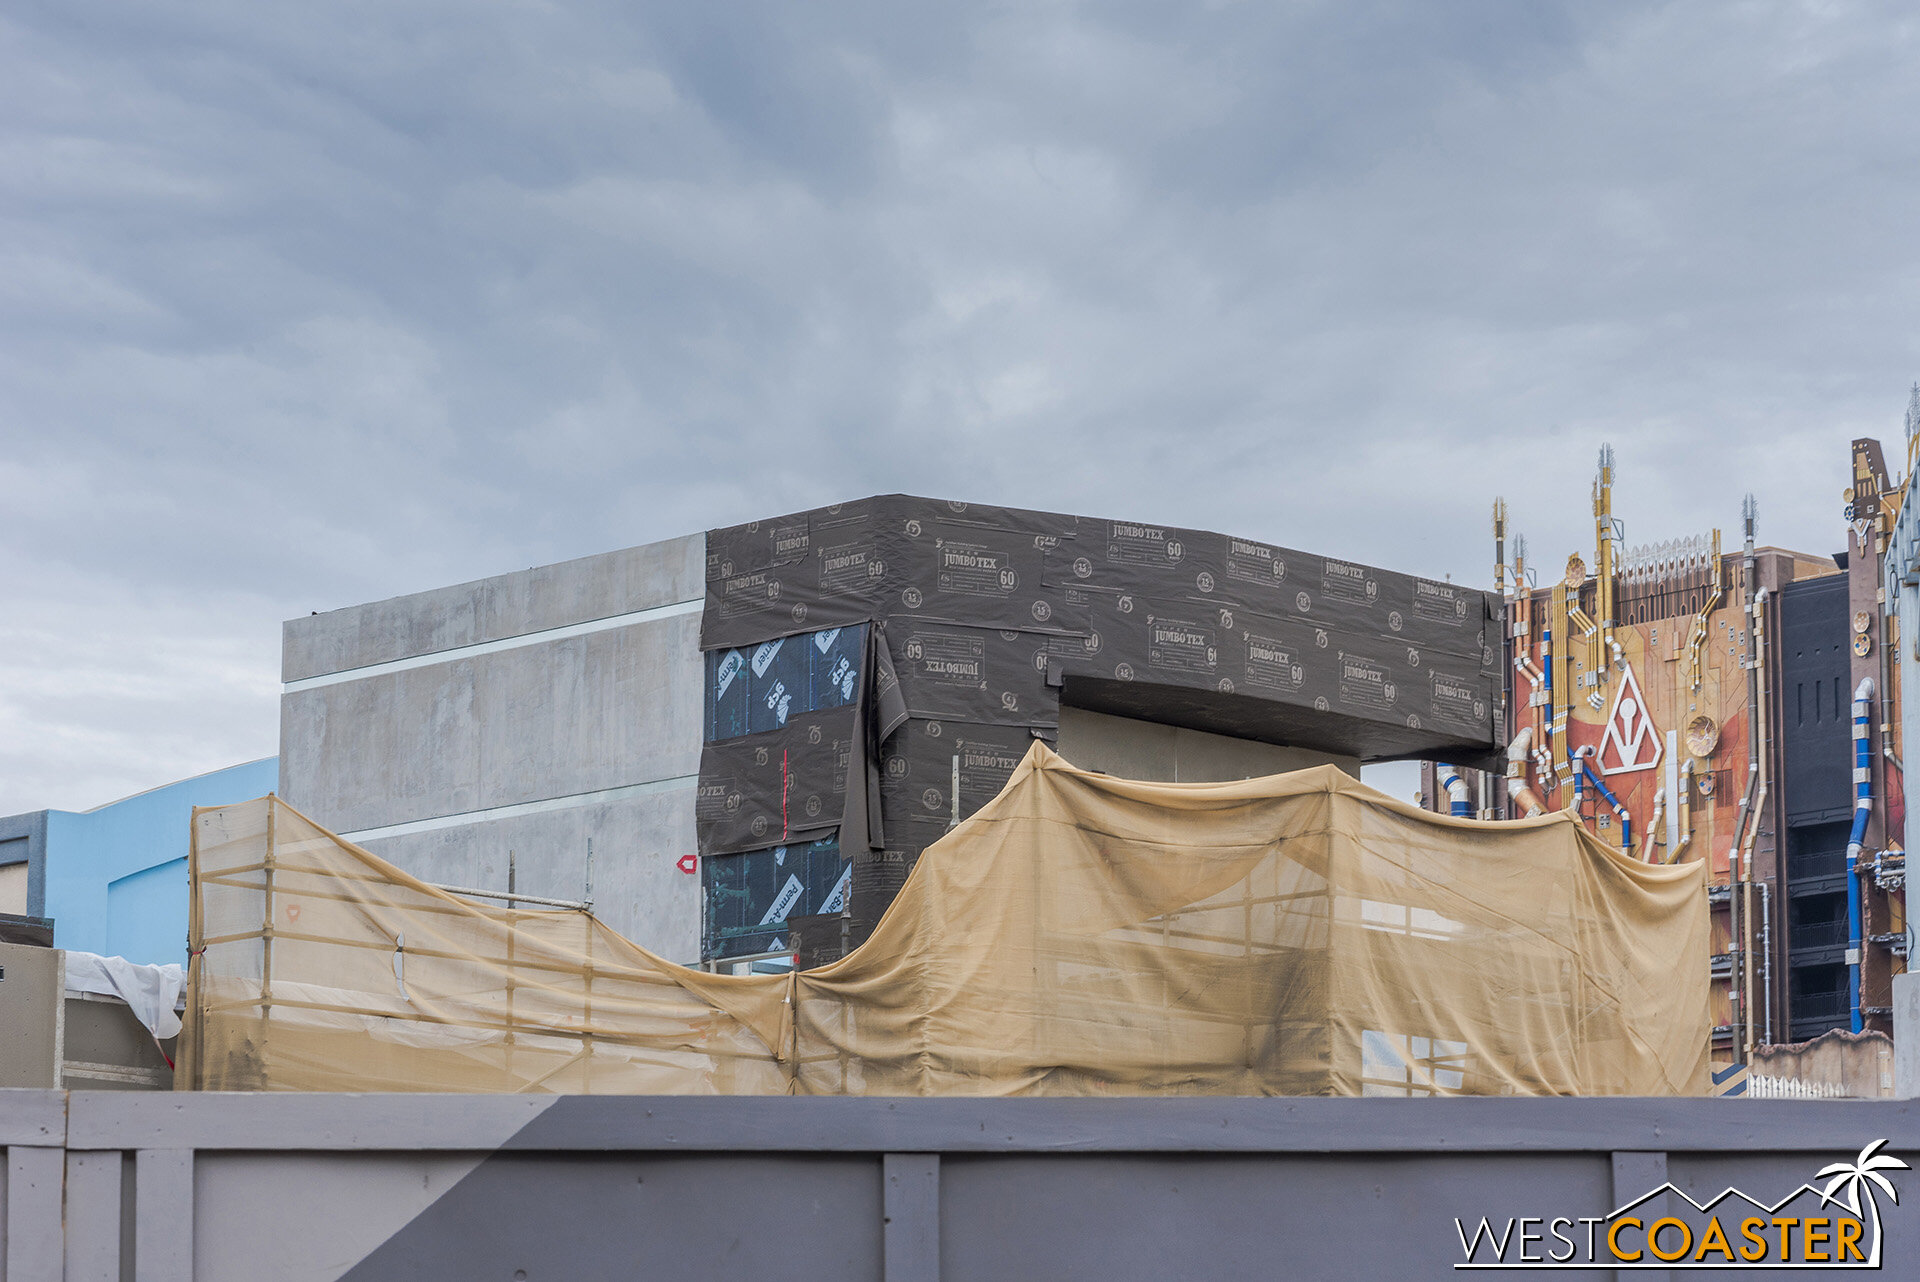  Plaster has covered parts of the future Spiderman ride building, and waterproofing has covered the rest. 